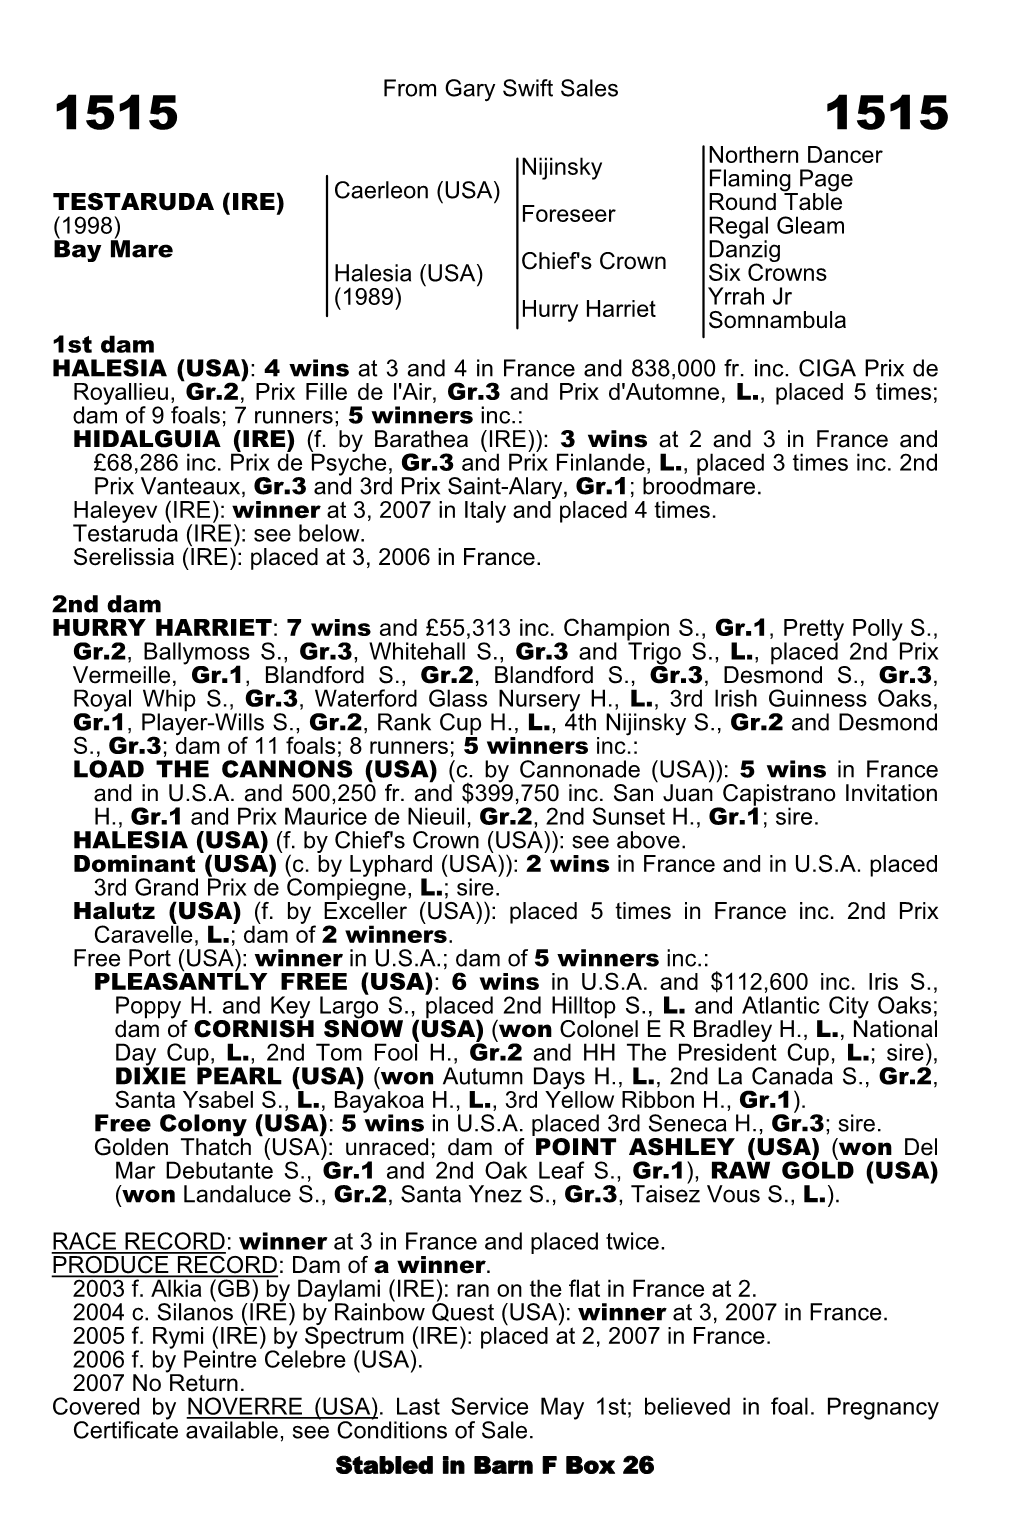 From Gary Swift Sales Nijinsky Northern Dancer Flaming Page Caerleon (USA) Foreseer Round Table Regal Gleam Chief's Crown Danzig